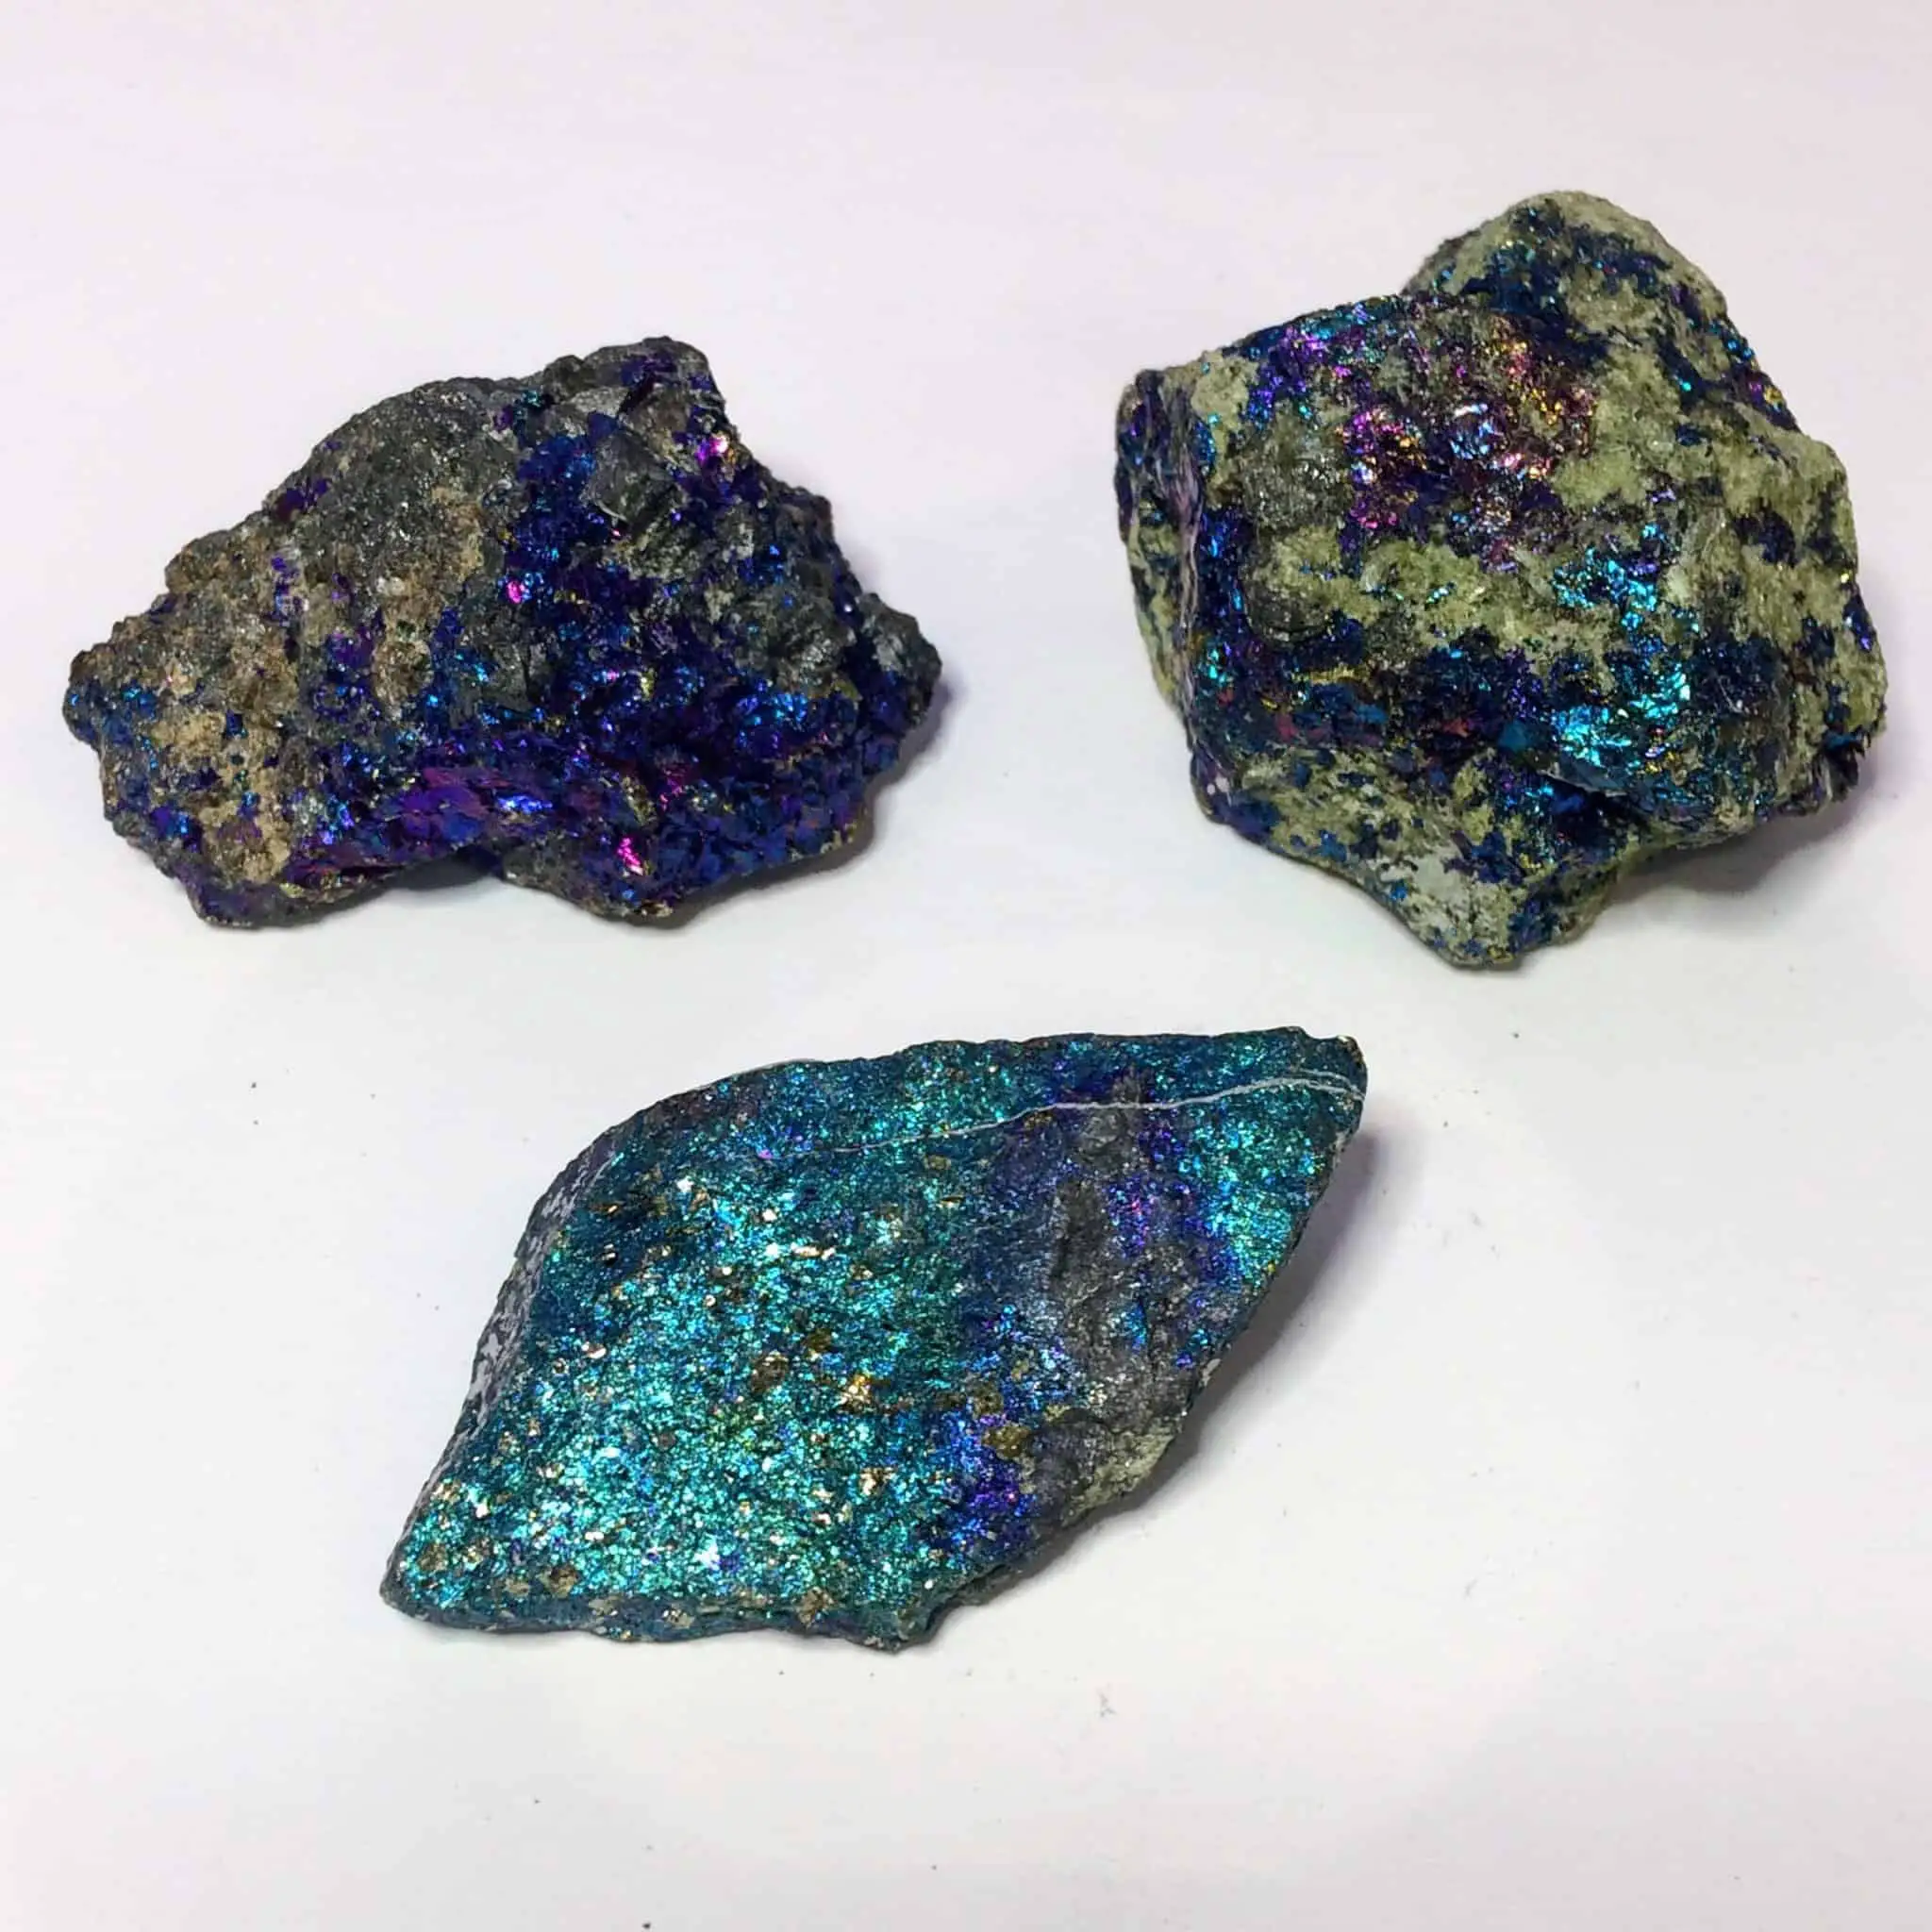 Historical Significance Of Chalcopyrite